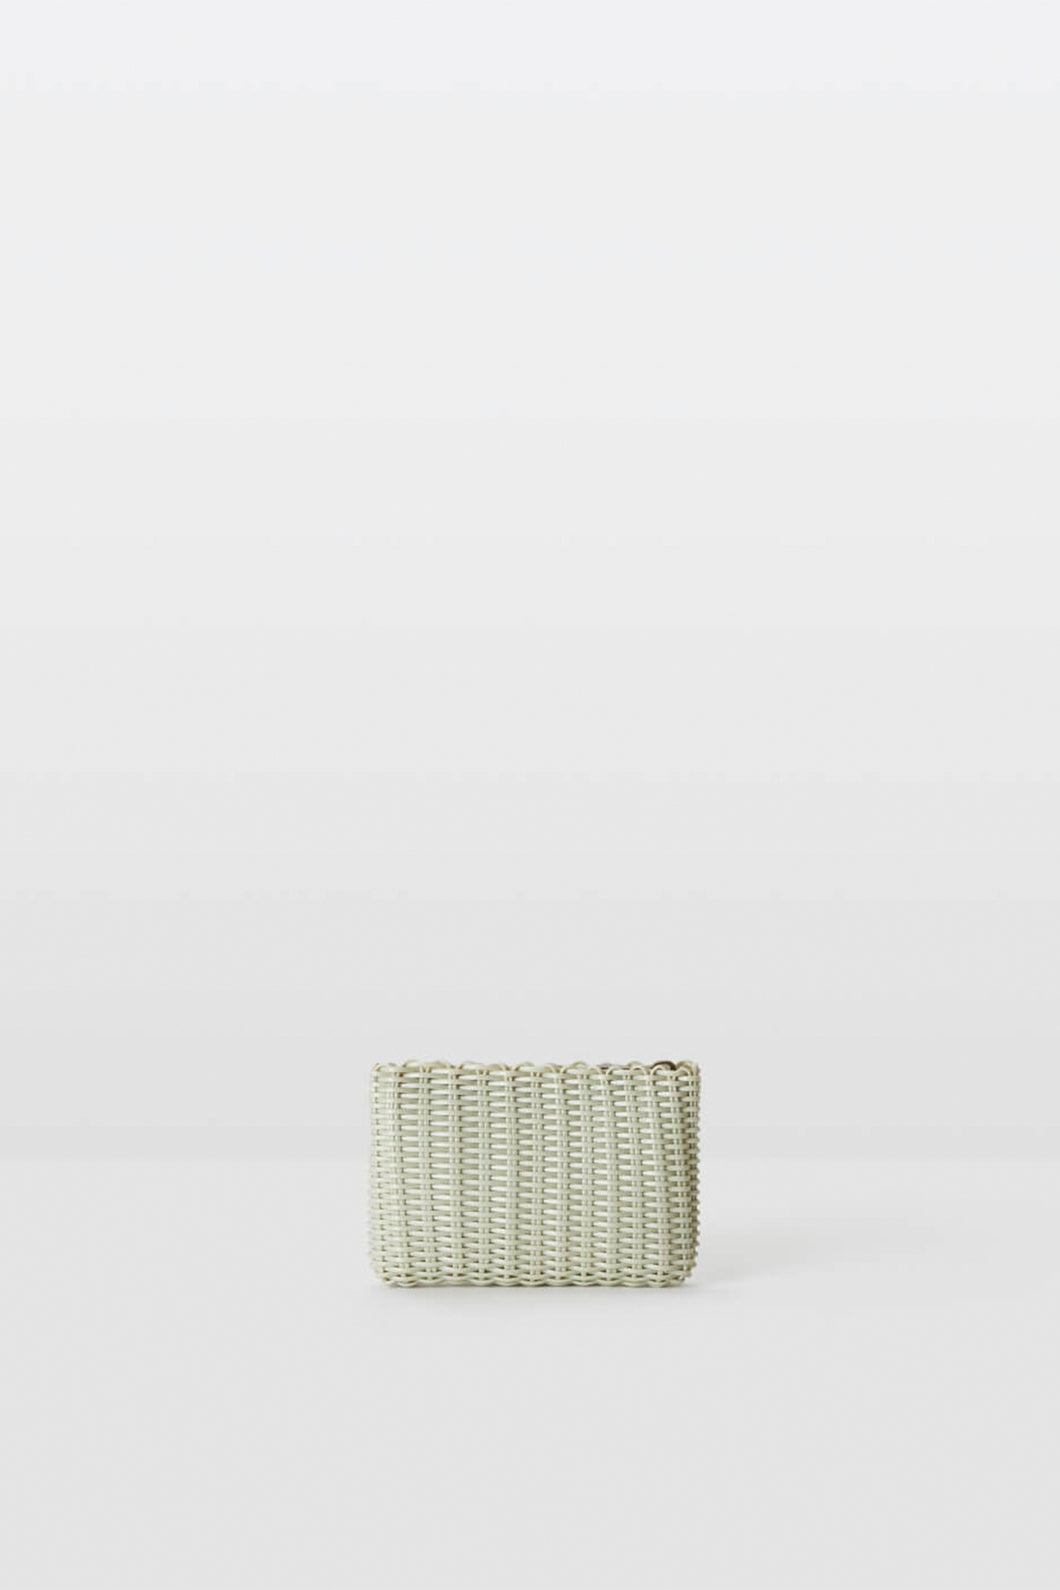 Palorosa Extra Small Clutch in Palm